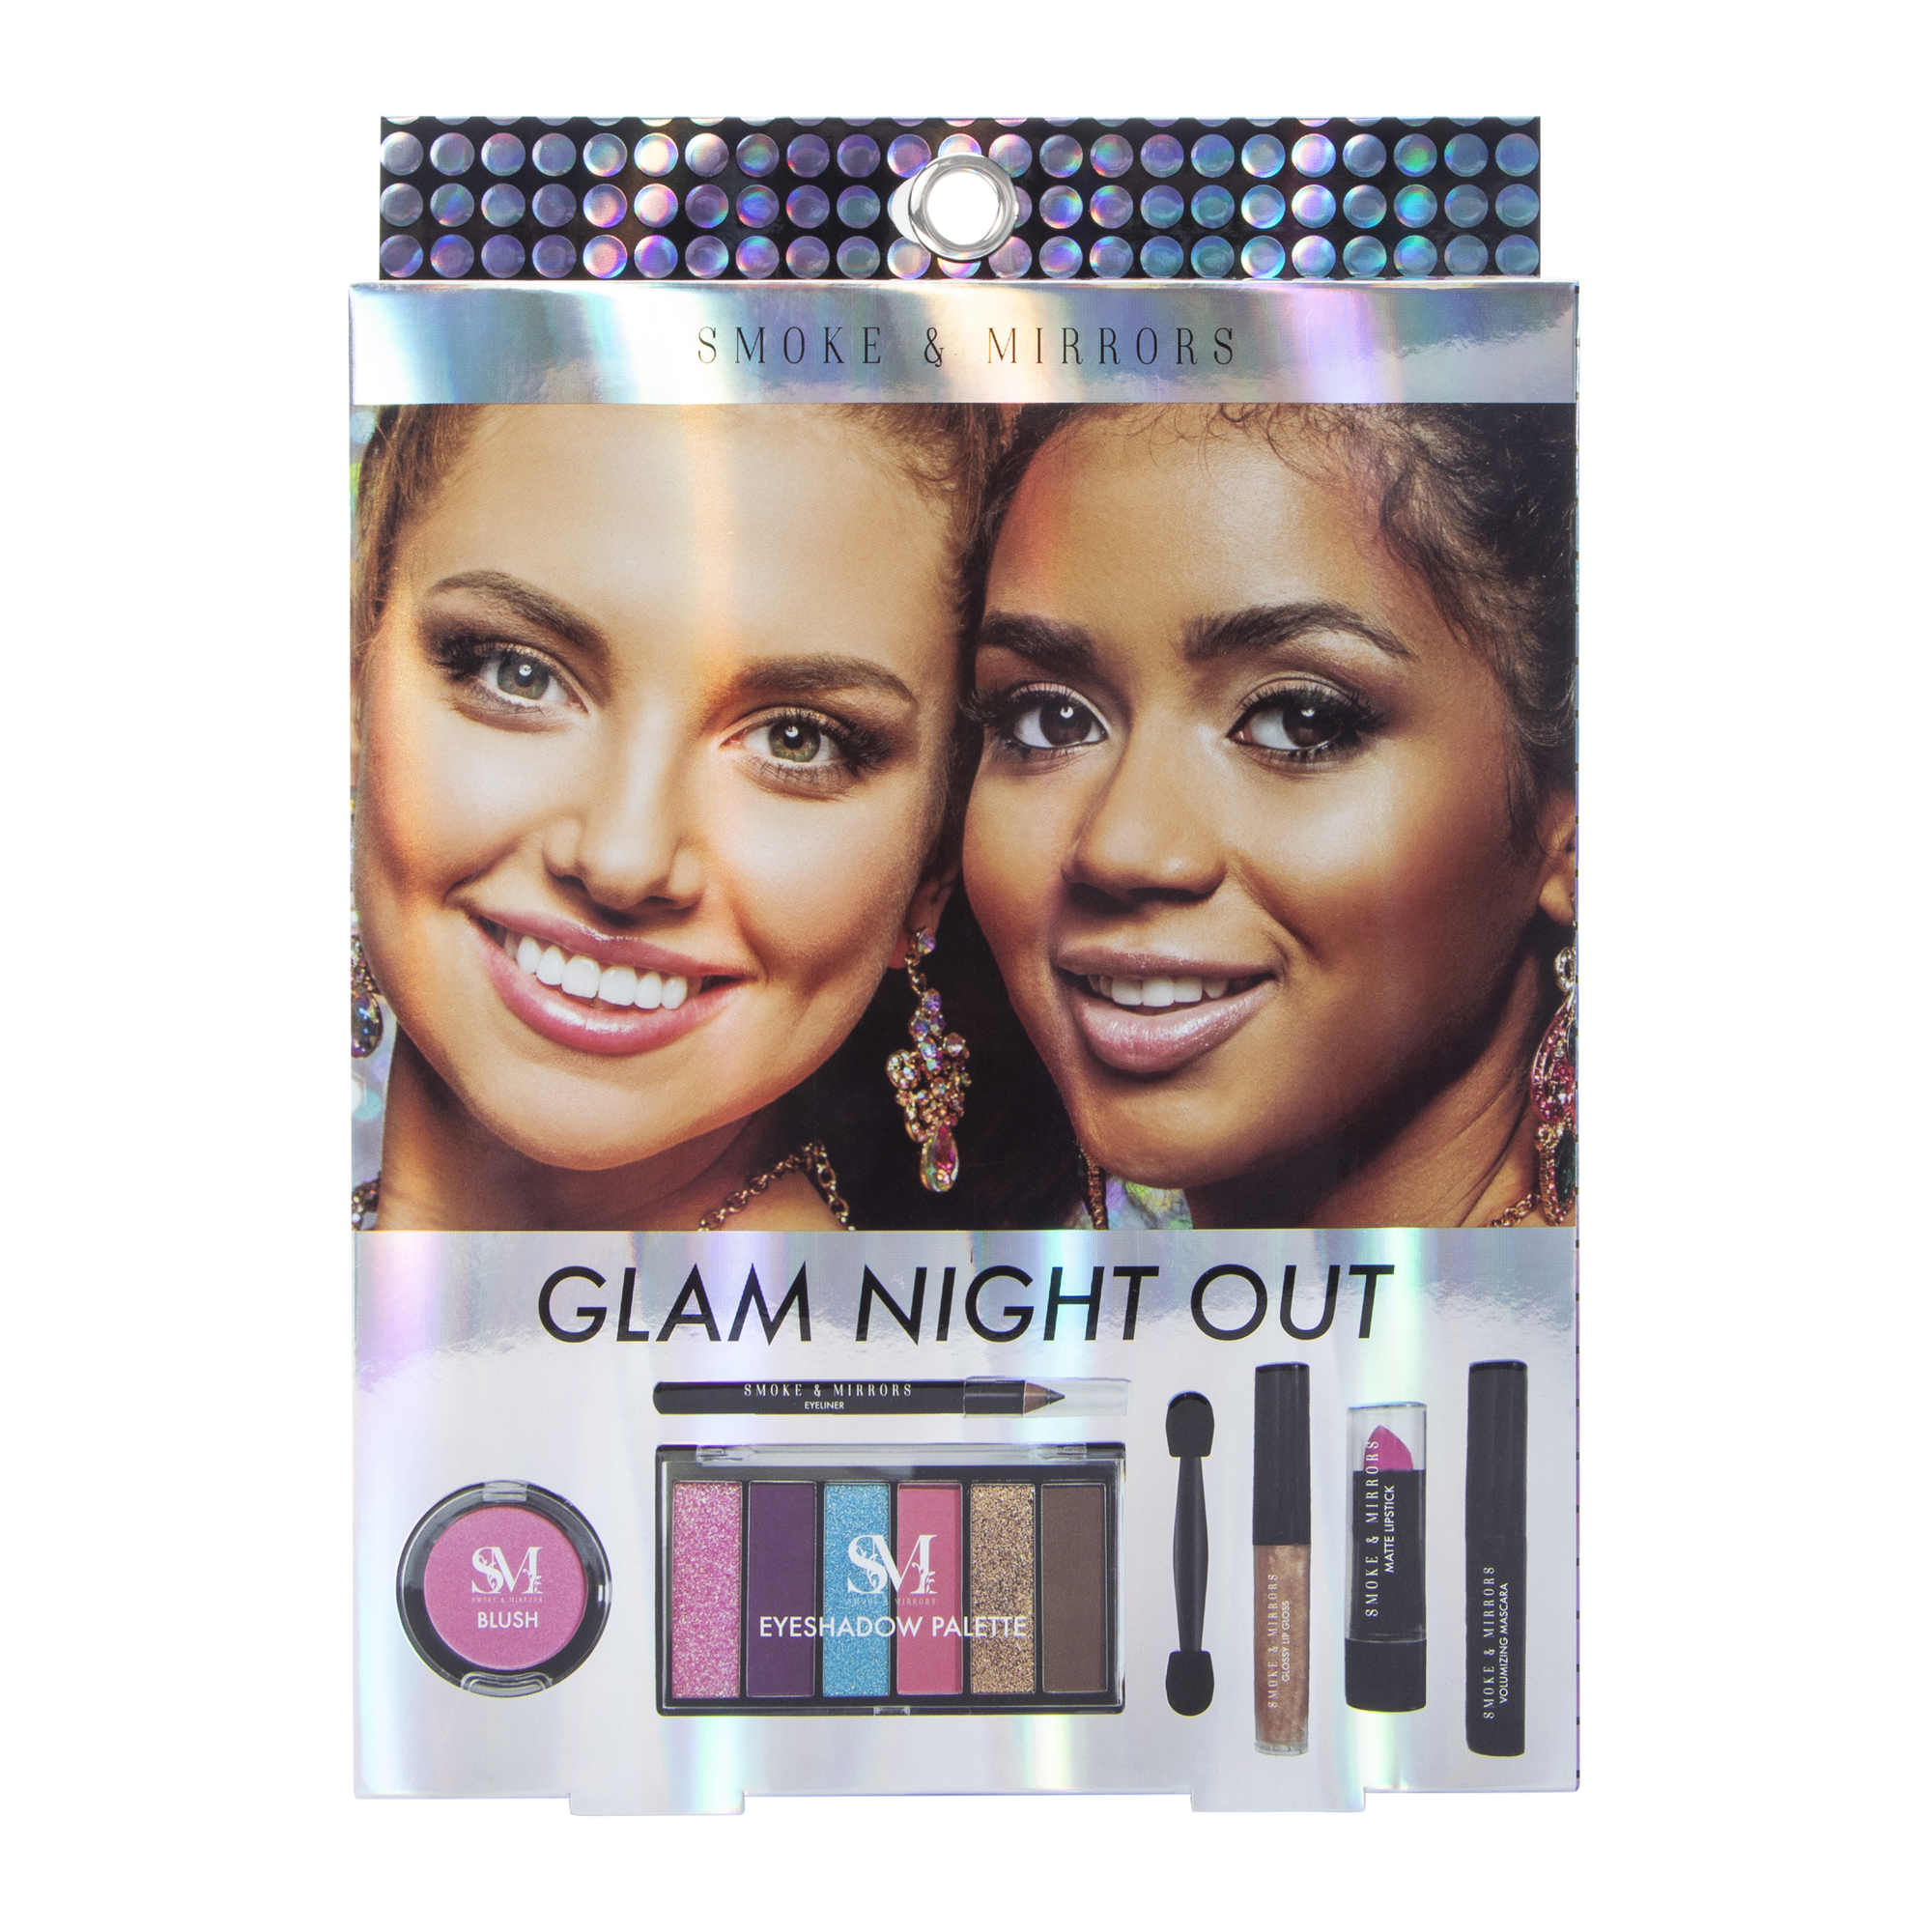 smoke & mirrors glam night out makeup kit 7-count